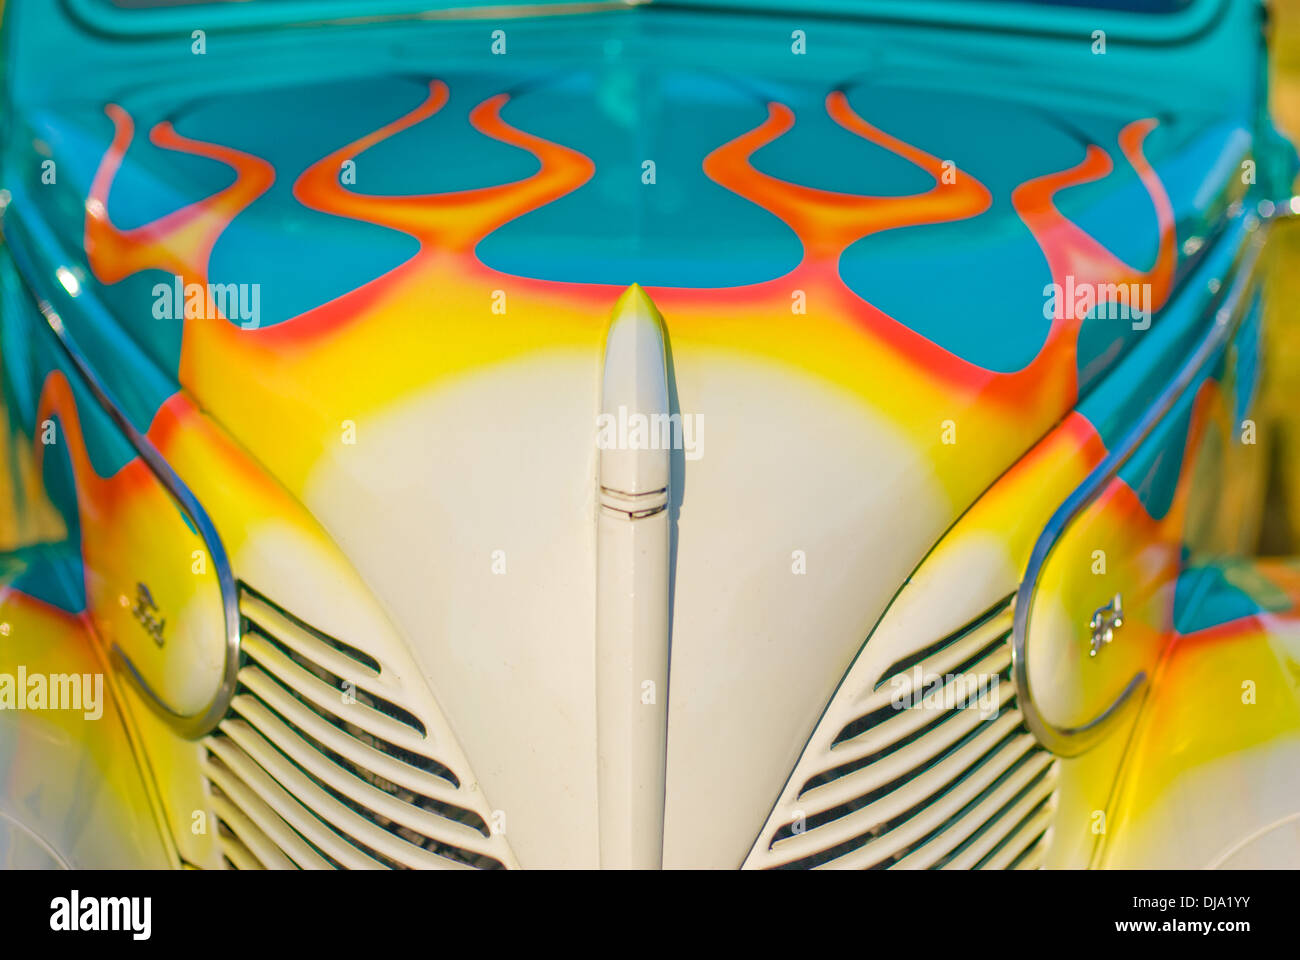 A 1939 Ford hot rod with flames painted on the hood. Stock Photo